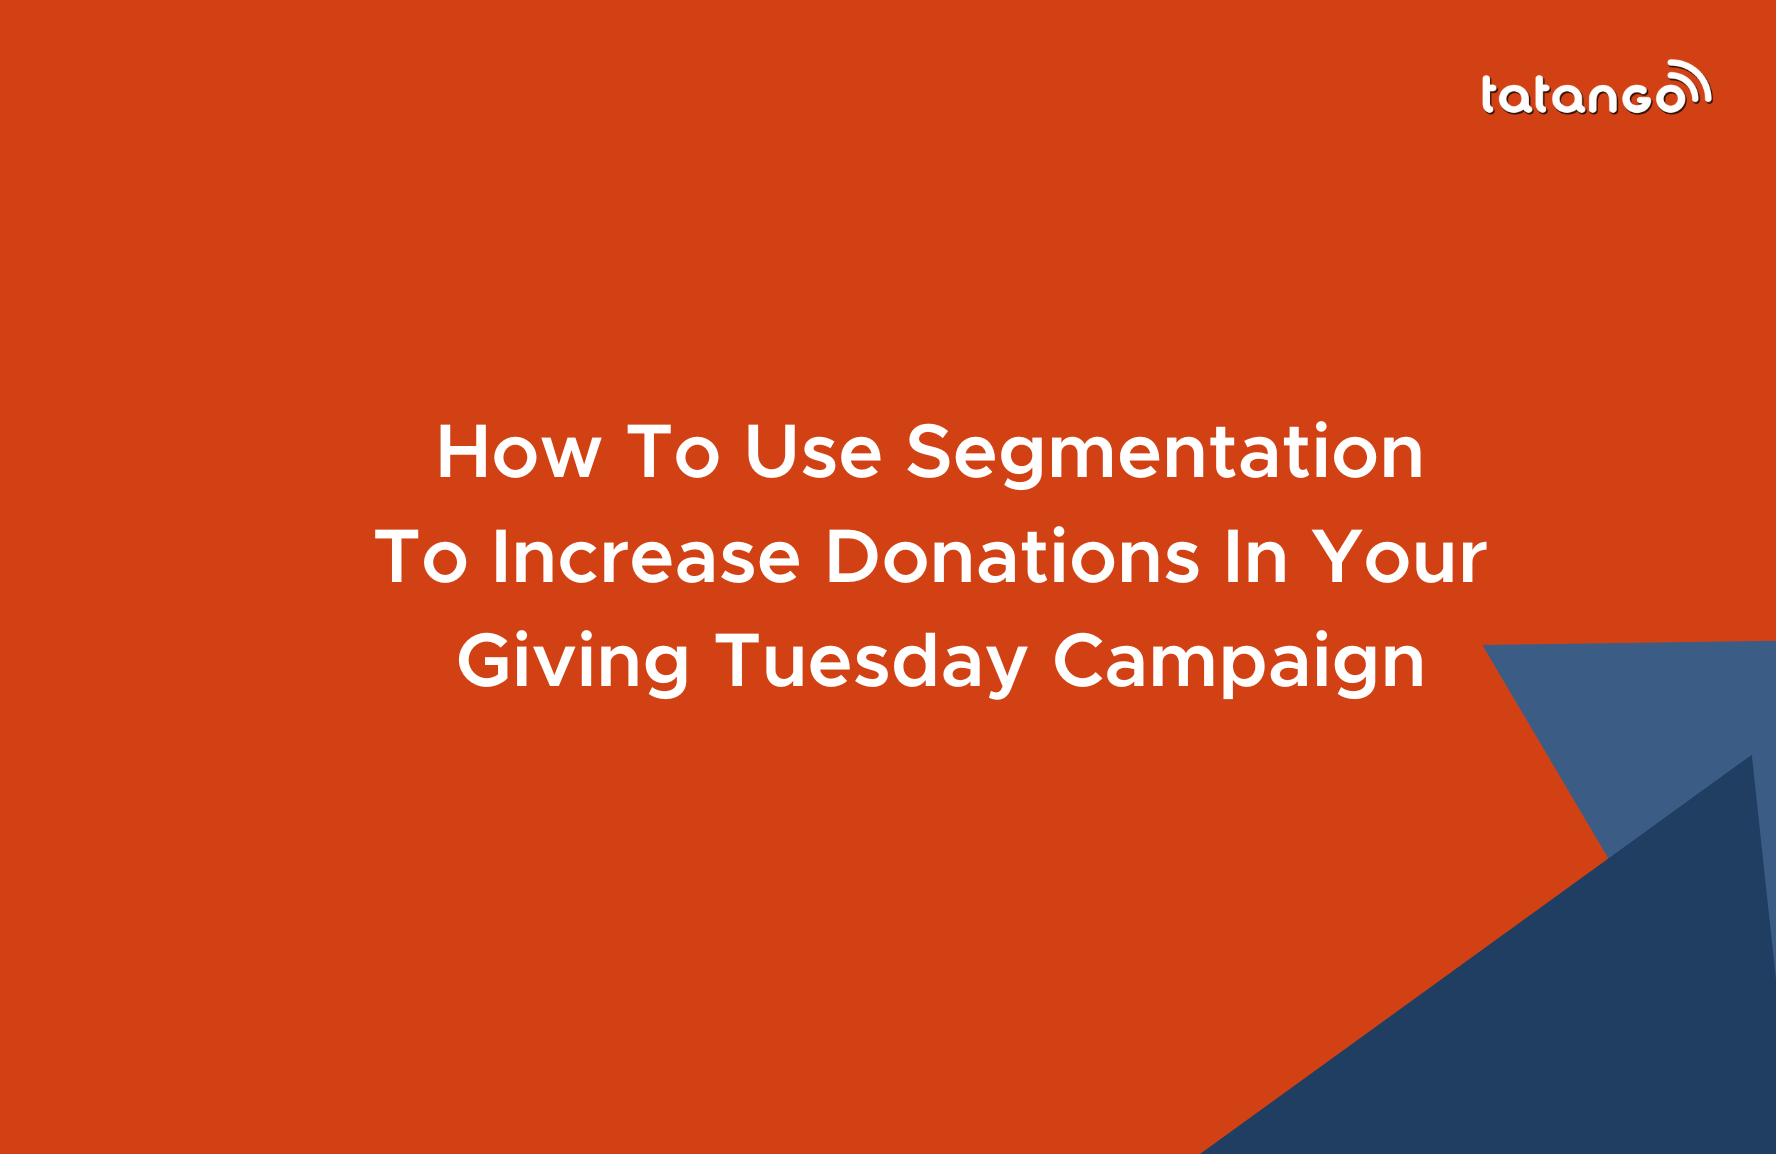 How To Use Segmentation To Increase Donations in Your Giving Tuesday Campaign